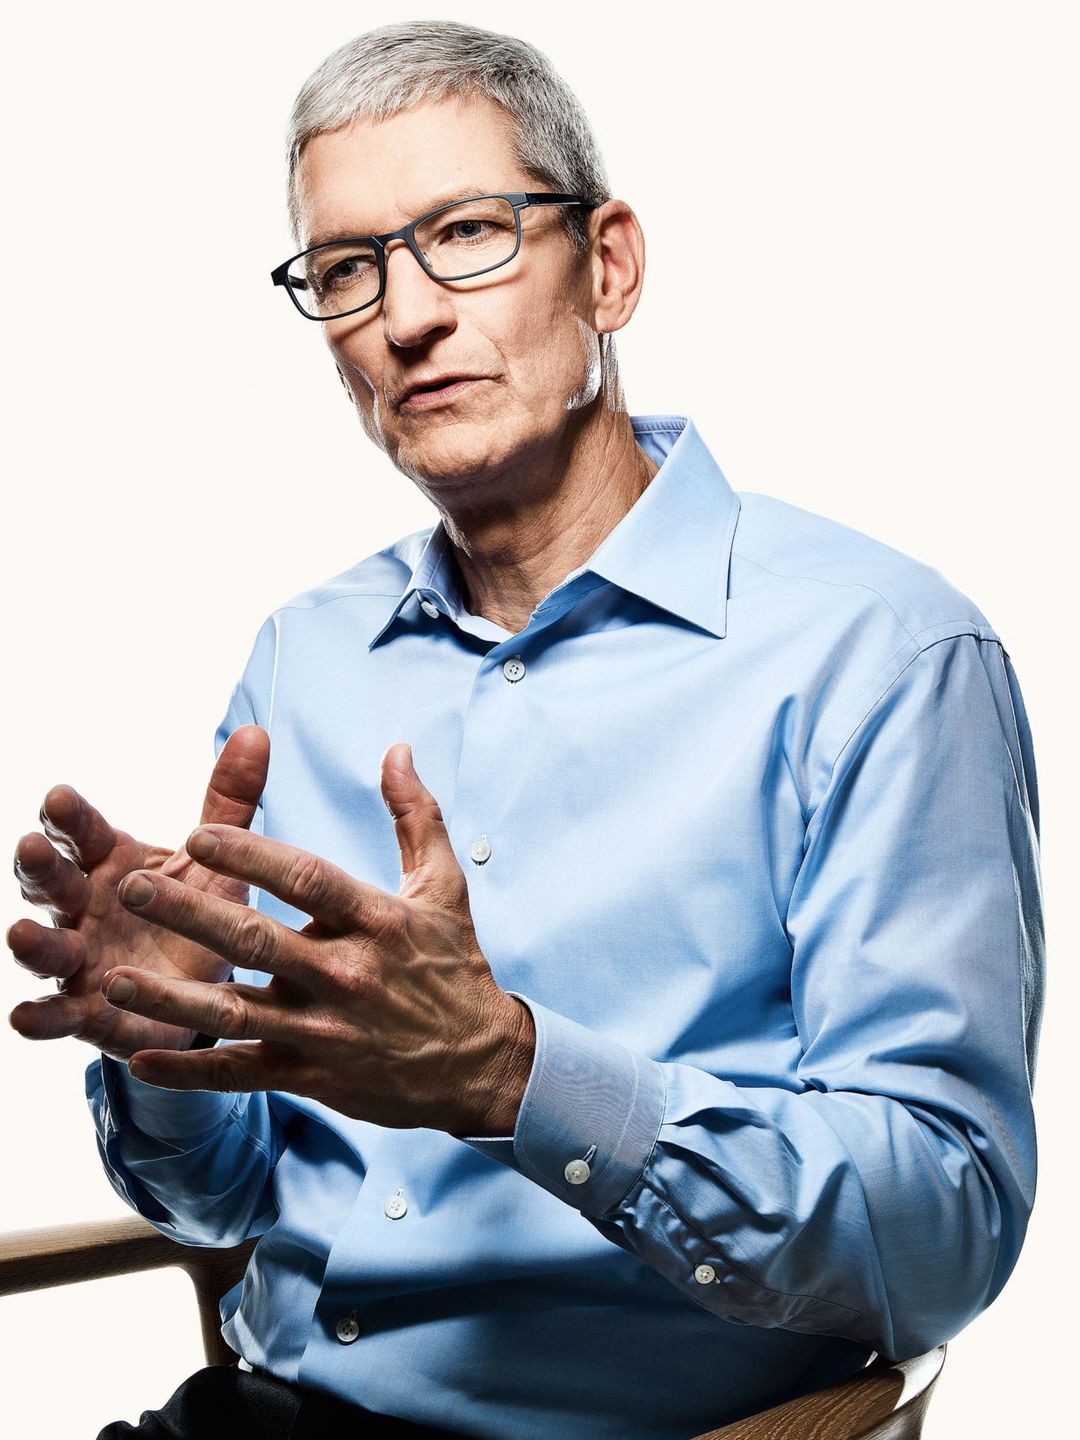 Tim Cook appearance